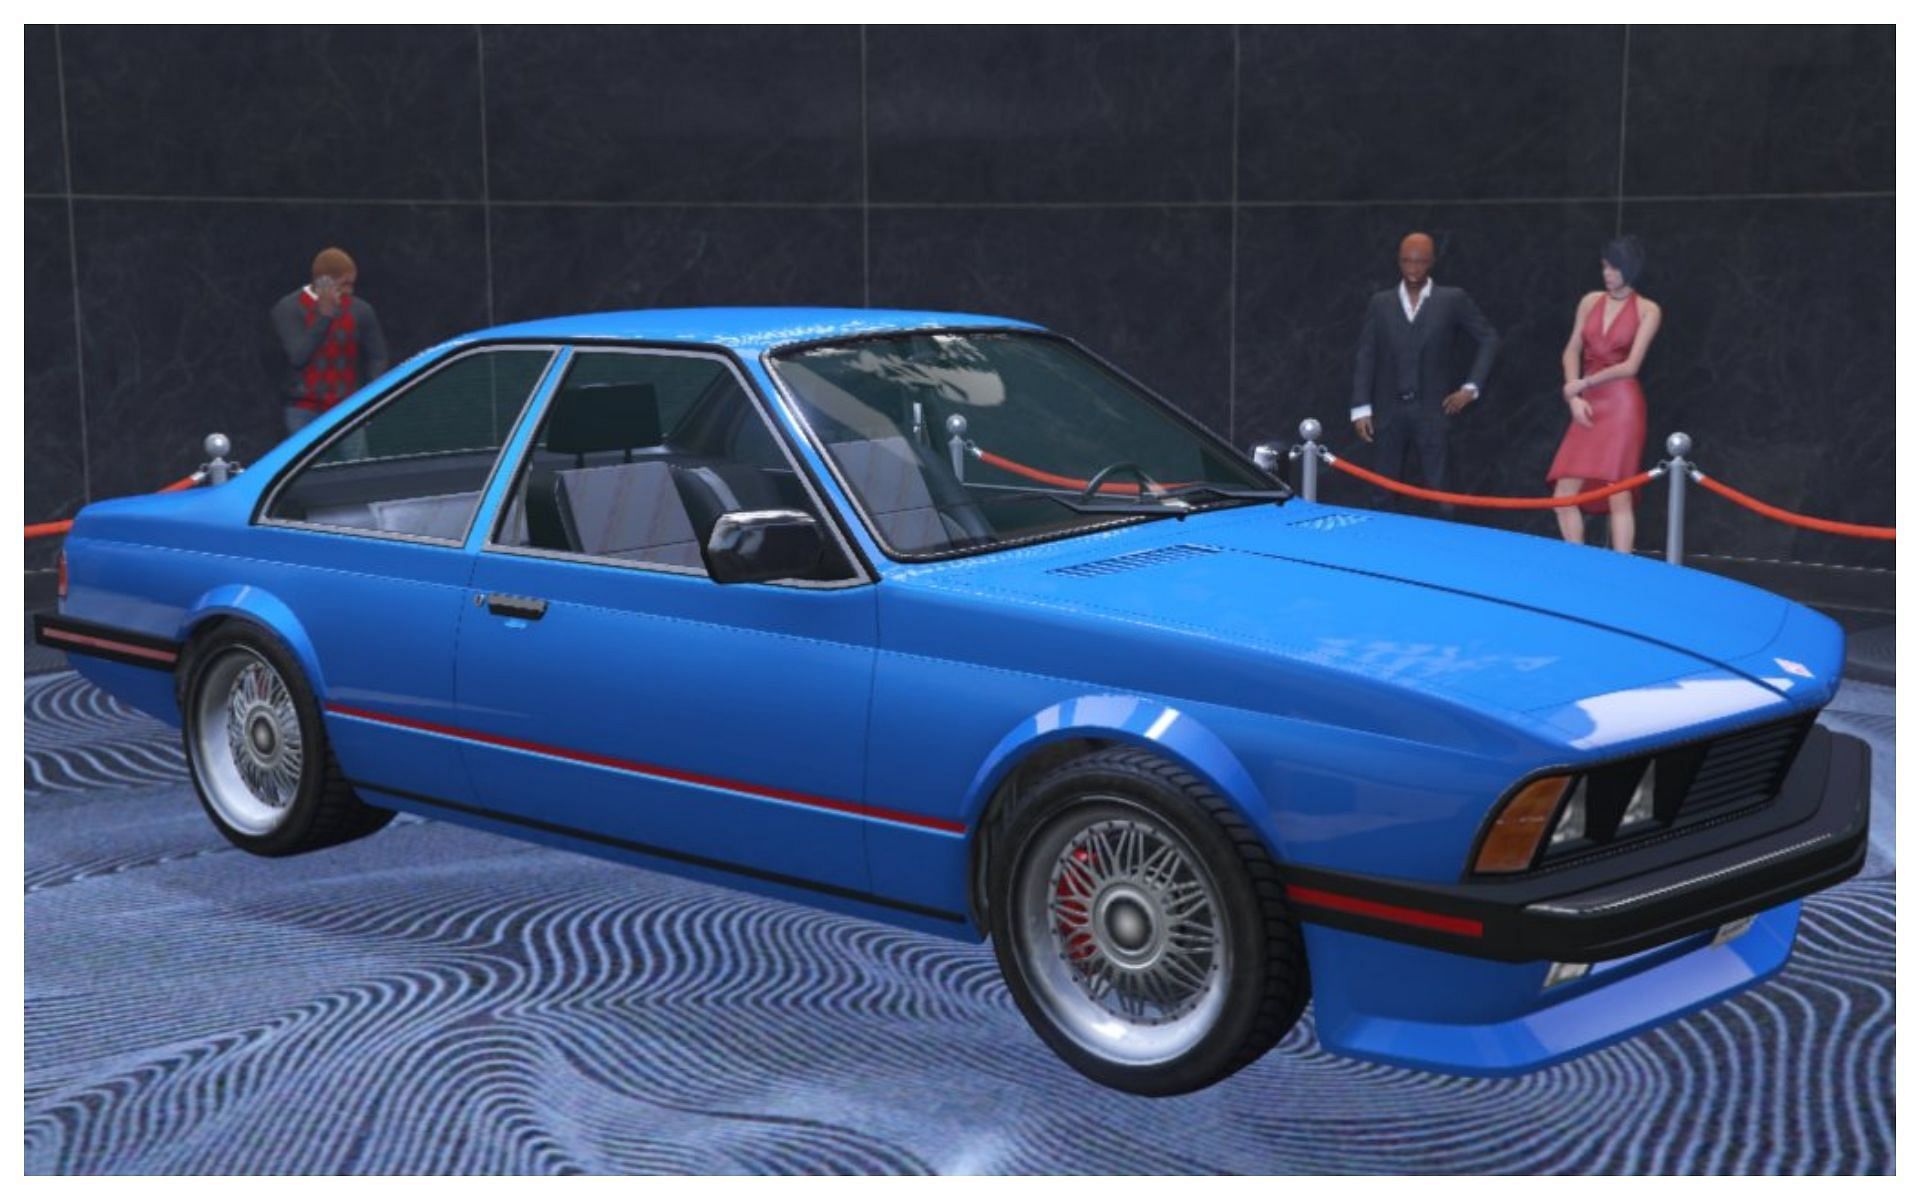 Podium car as of March 10 in GTA Online (Image via Twitter/TezFunz2)